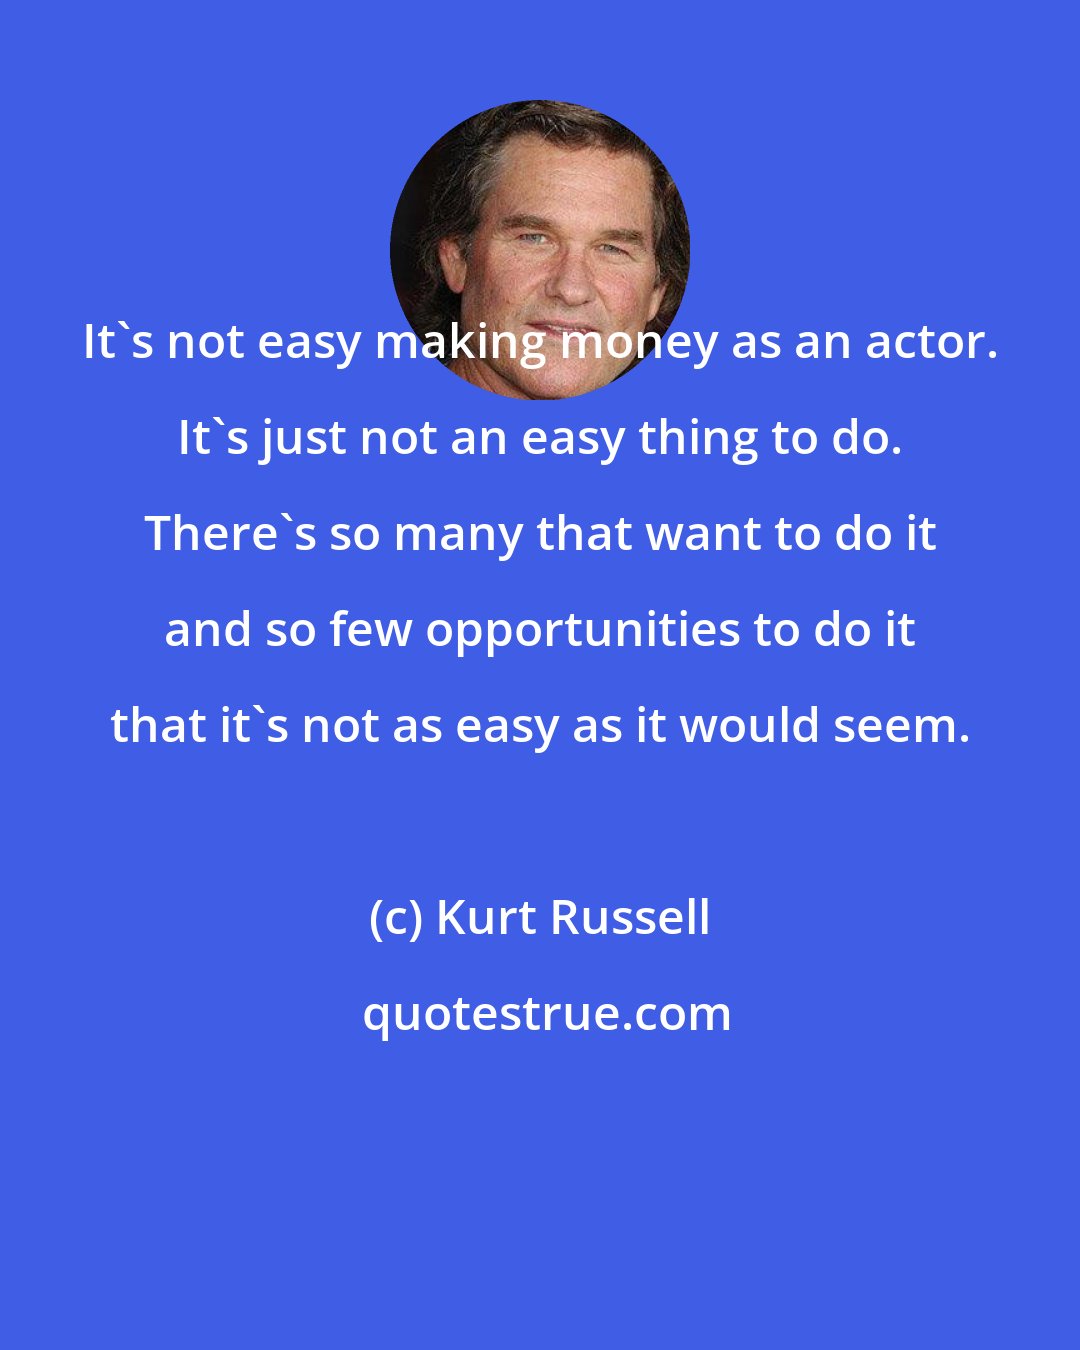 Kurt Russell: It's not easy making money as an actor. It's just not an easy thing to do. There's so many that want to do it and so few opportunities to do it that it's not as easy as it would seem.